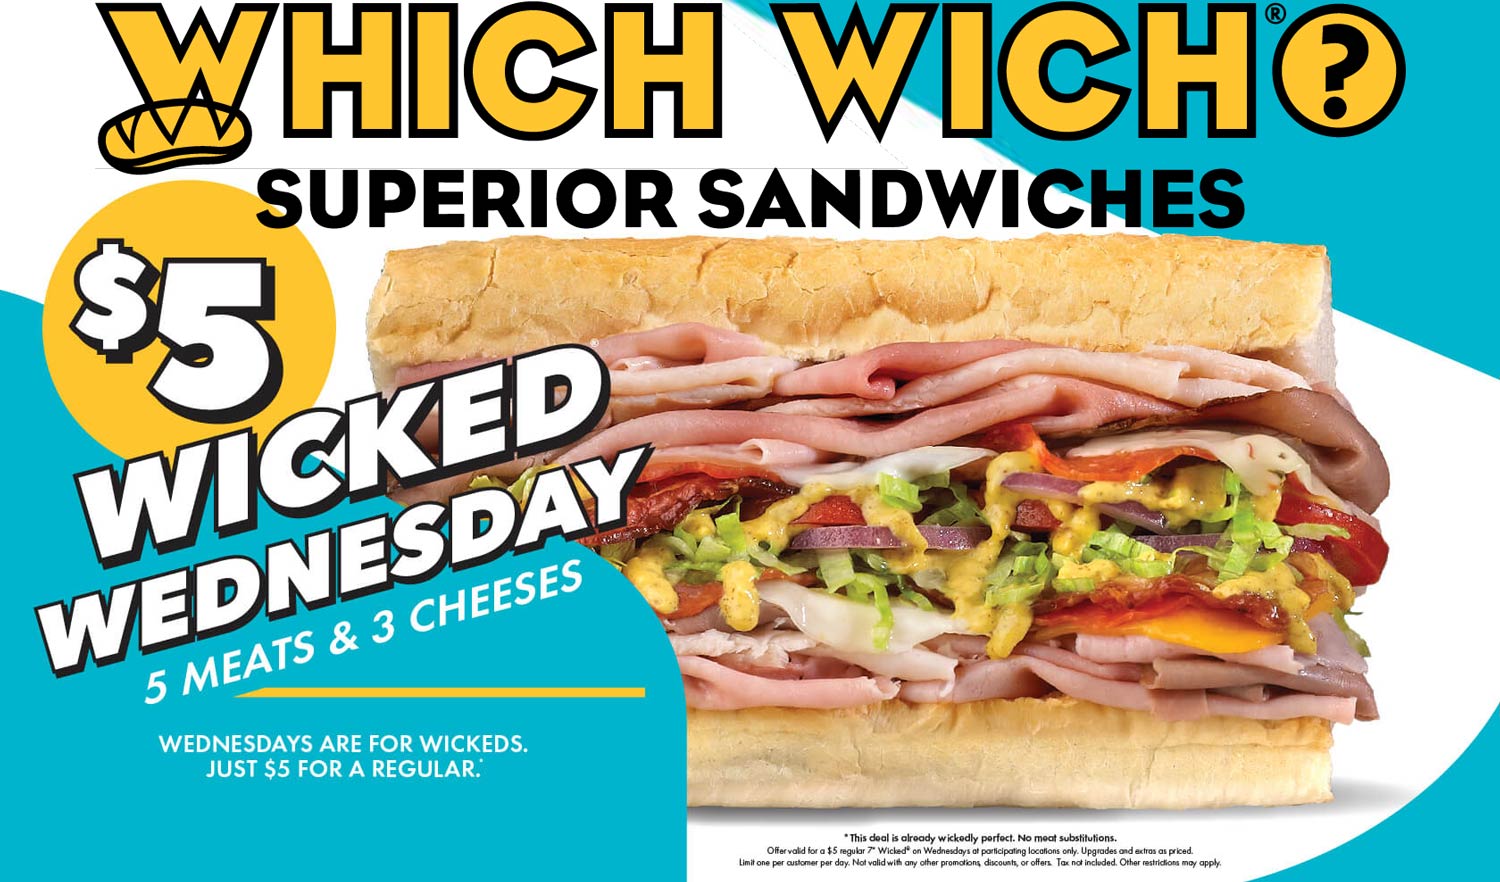 Which Wich restaurants Coupon  5 meats 3 cheeses wicked sandwich $5 today at Which Wich #whichwich 